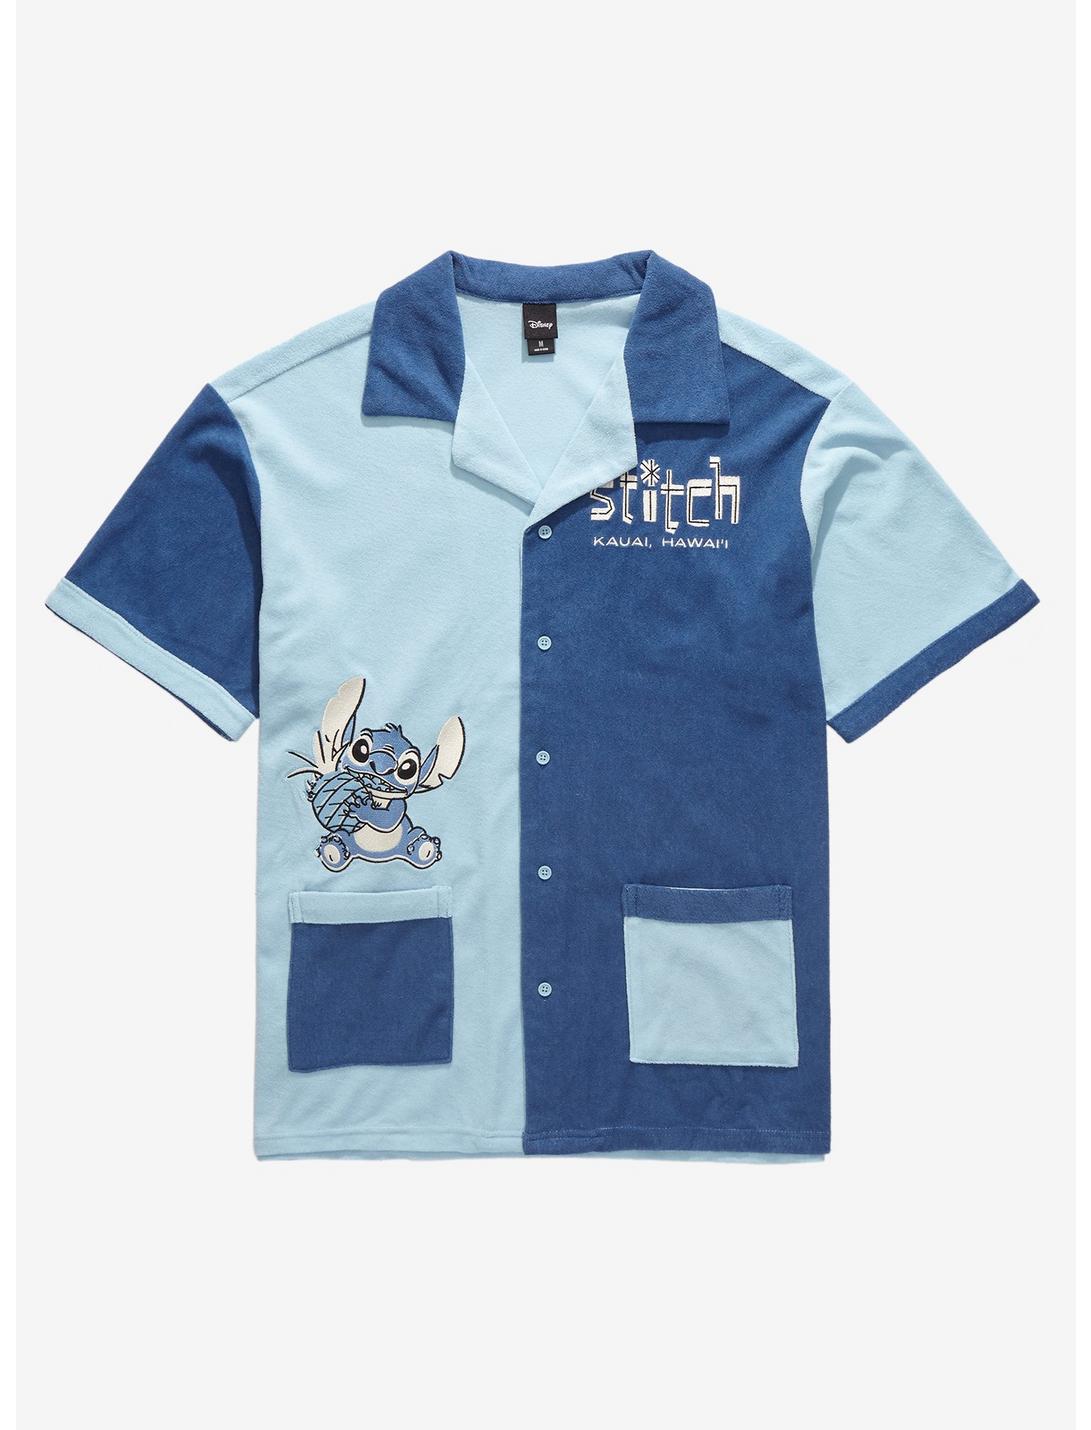 Disney Lilo & Stitch Kauai Hawaii Color Blocked Terry Cloth Button-Up - BoxLunch Exclusive, LIGHT BLUE, hi-res